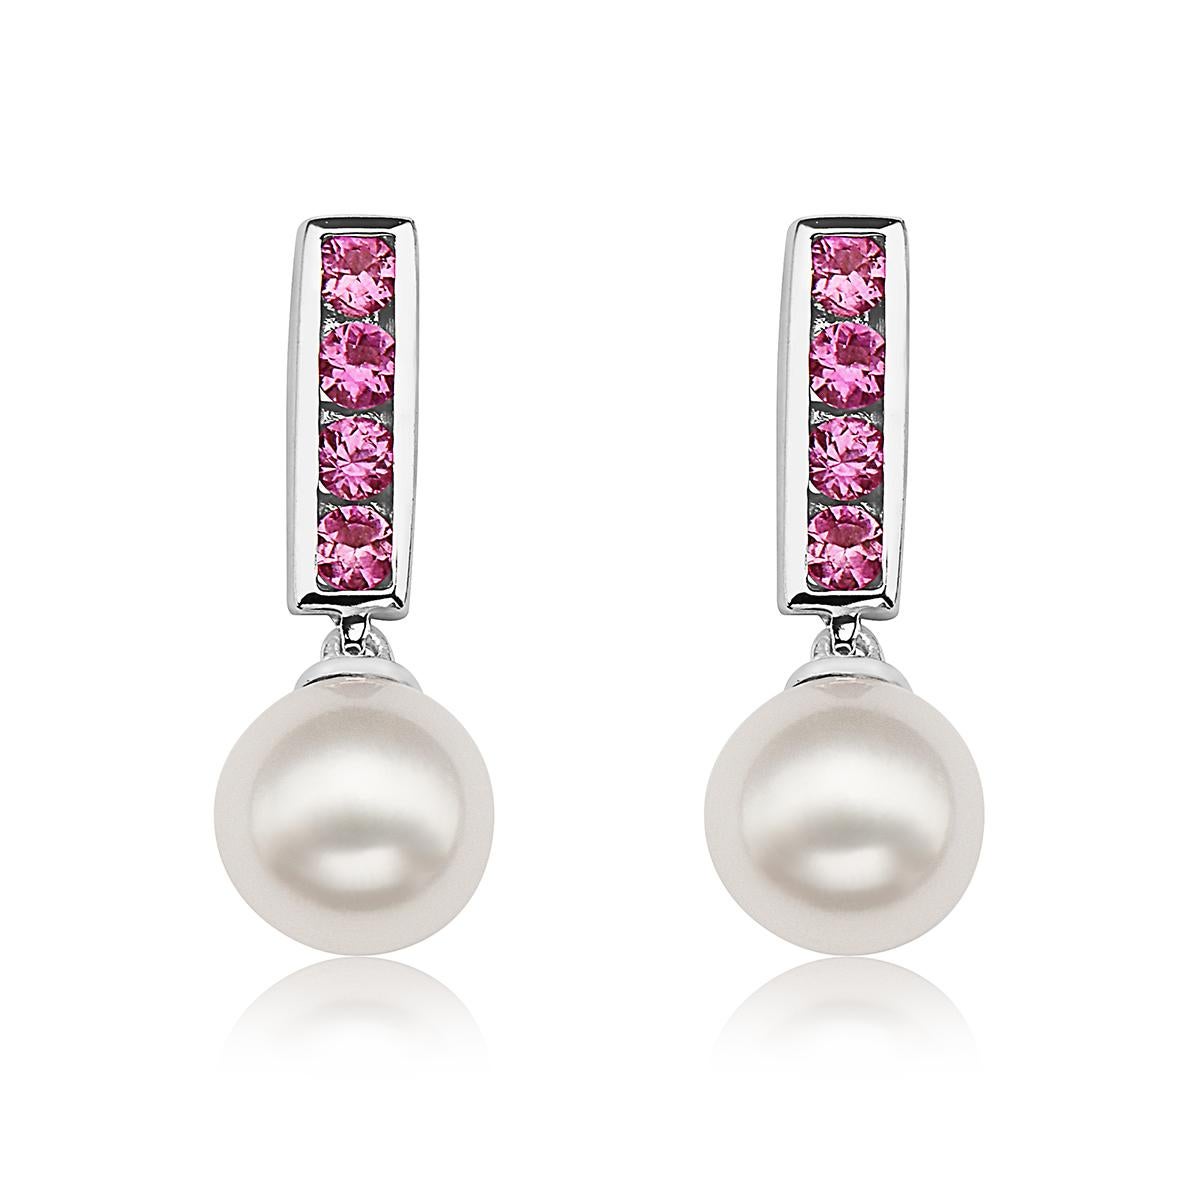 Gorgeous Akoya Pearls measuring 7mm dangle from channel-set genuine pink sapphires set in genuine 14K White Gold. This is a modern classic and sure to add a pop of color to your look. Great for everyday wear, these earrings are as versatile as they